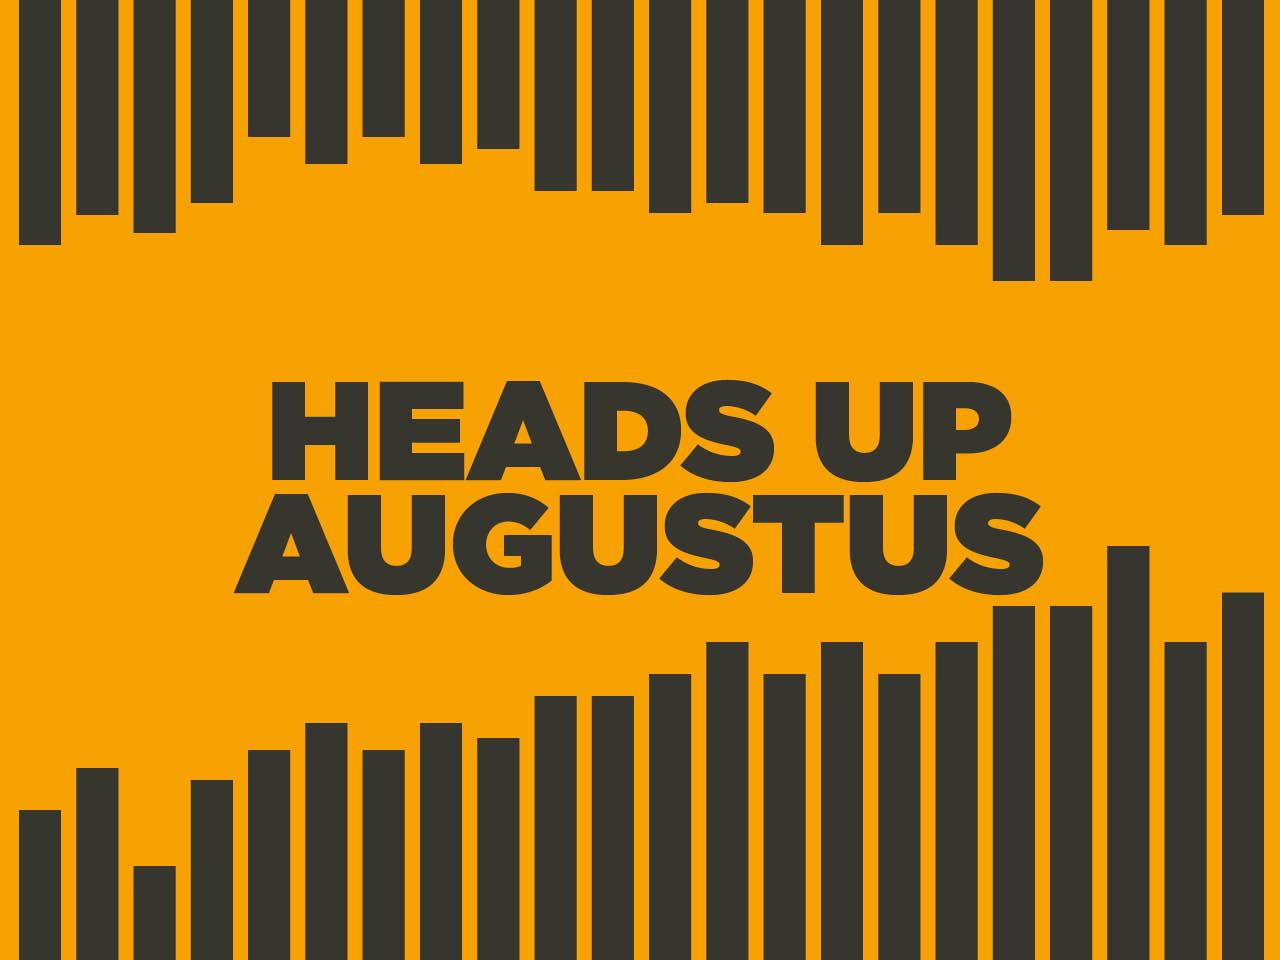 Heads Up Augustus